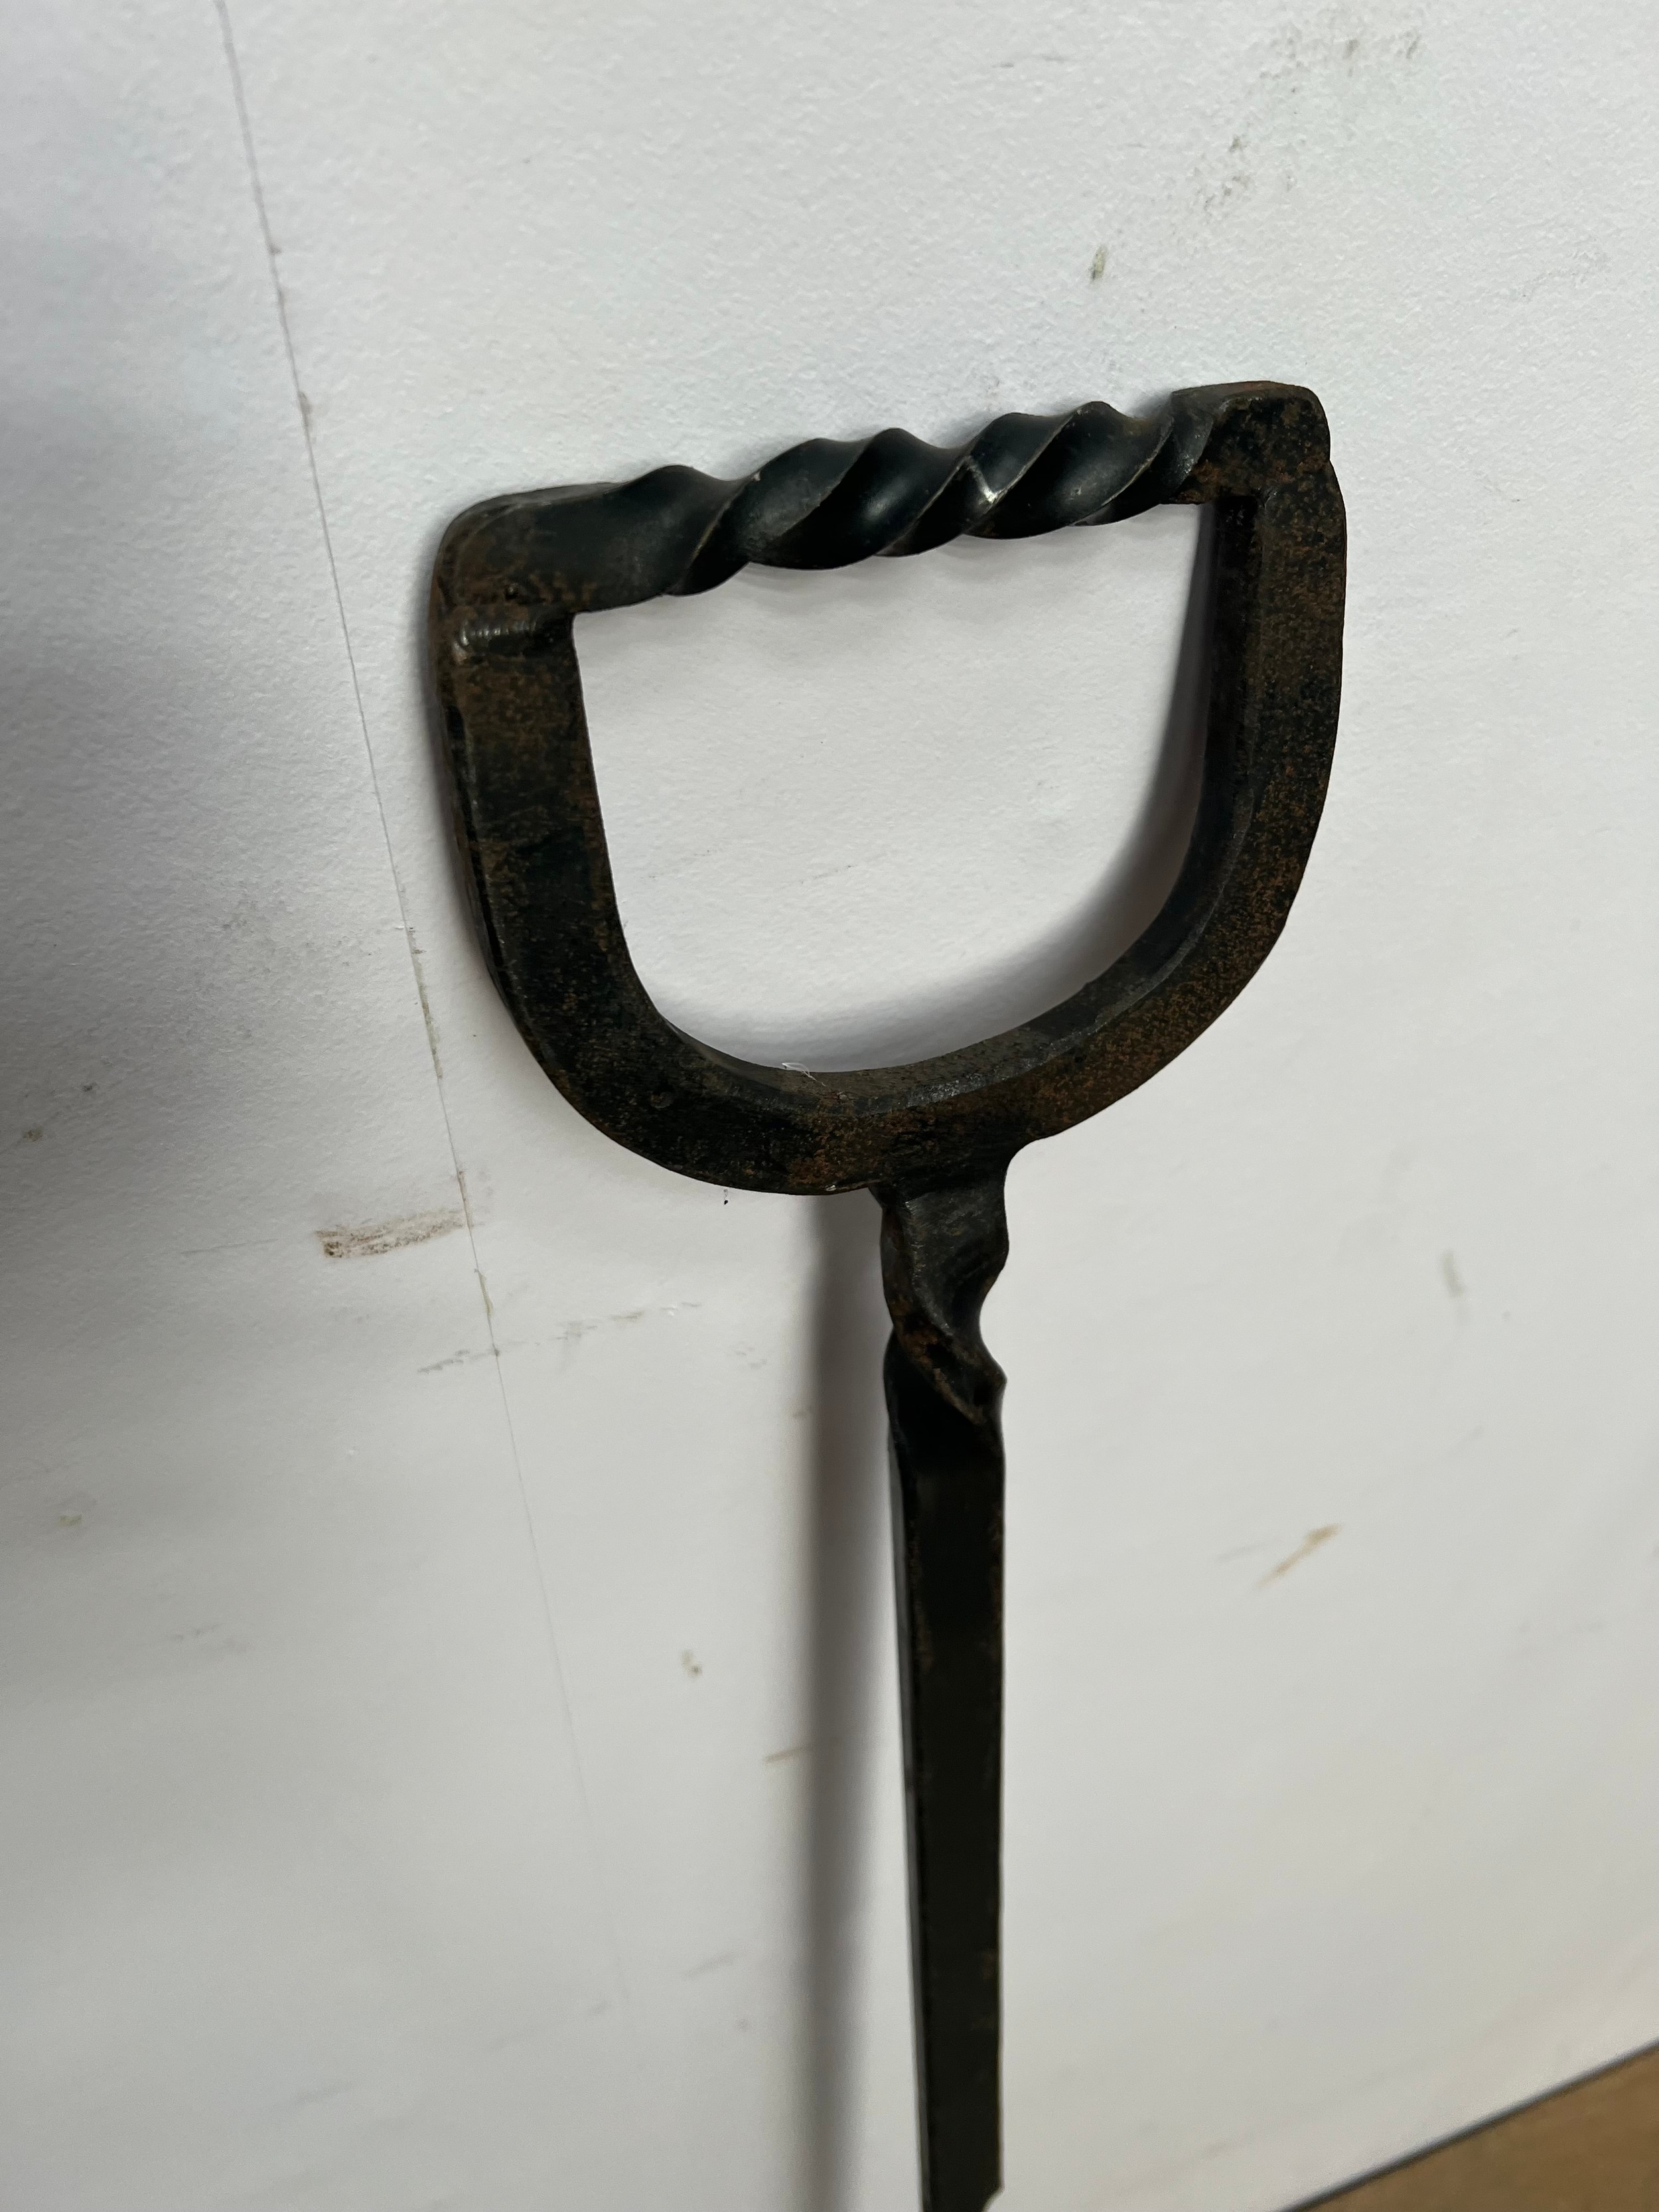 Wrought iron fork {H 119cm x W23cm x D 1cm}. (NOT AVAILABLE TO VIEW IN PERSON) - Image 2 of 2